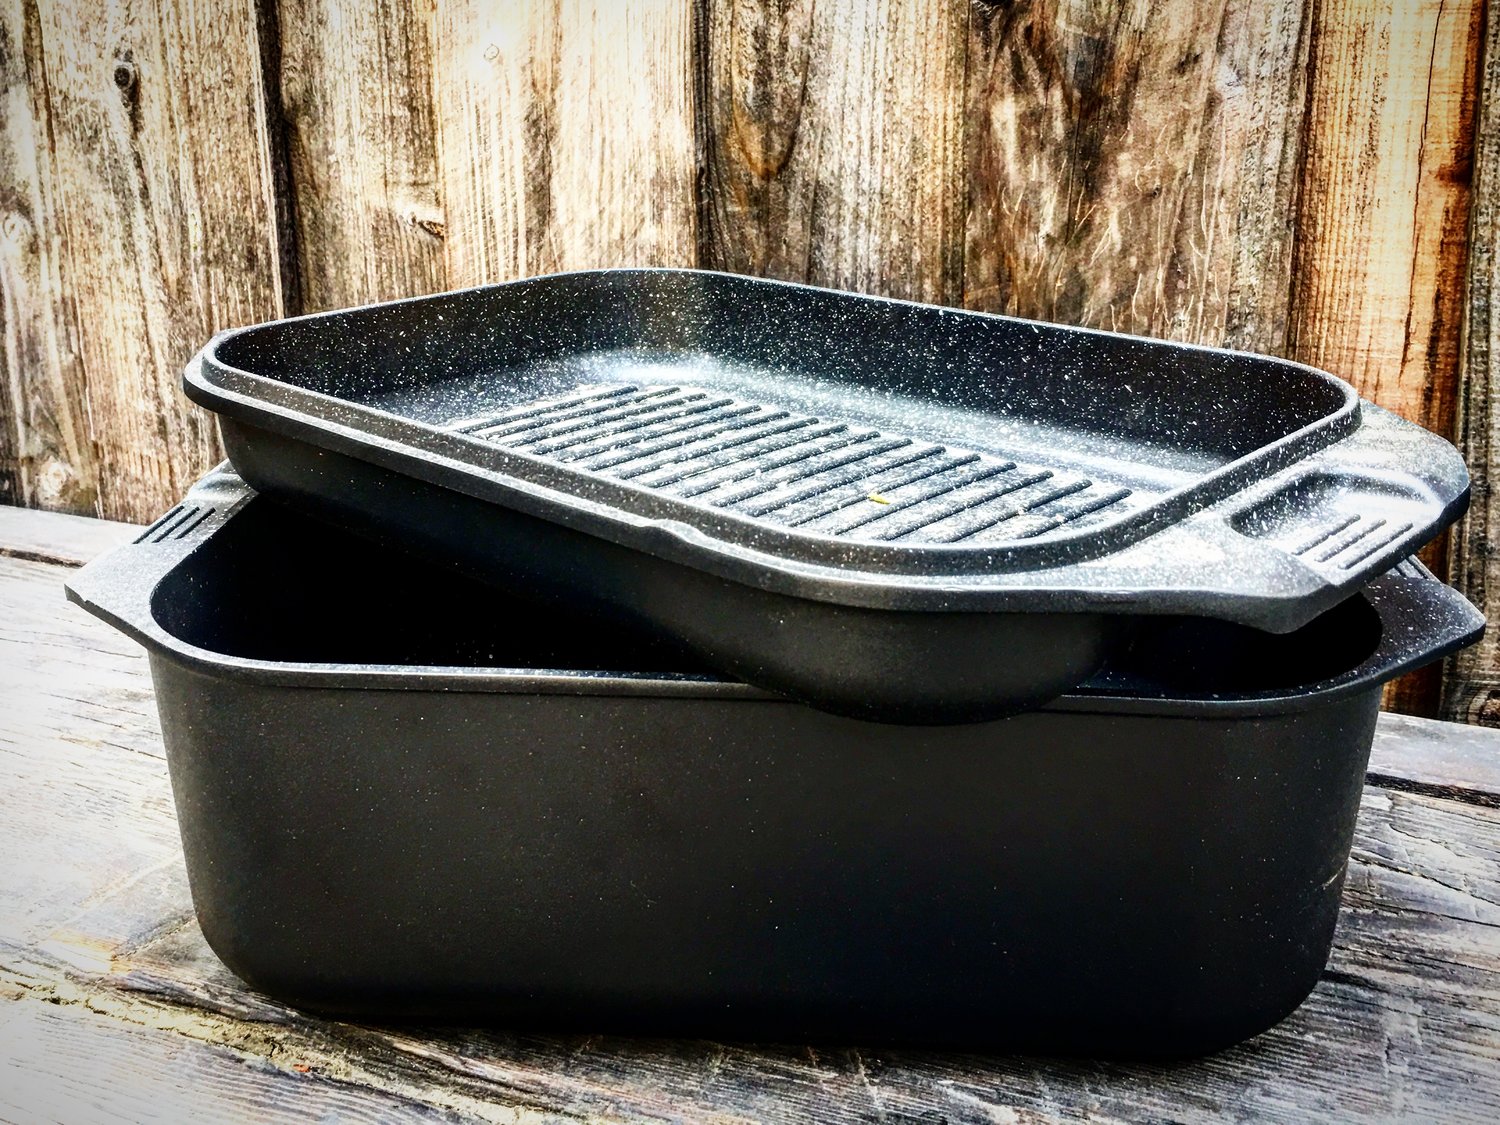 I used the top of the EuroCAST double-roaster. Our most versatile tool, it has induction-ready plates on both bottom and top for fast, energy-friendly, eco-friendly, non-toxic cooking on modern induction plates.